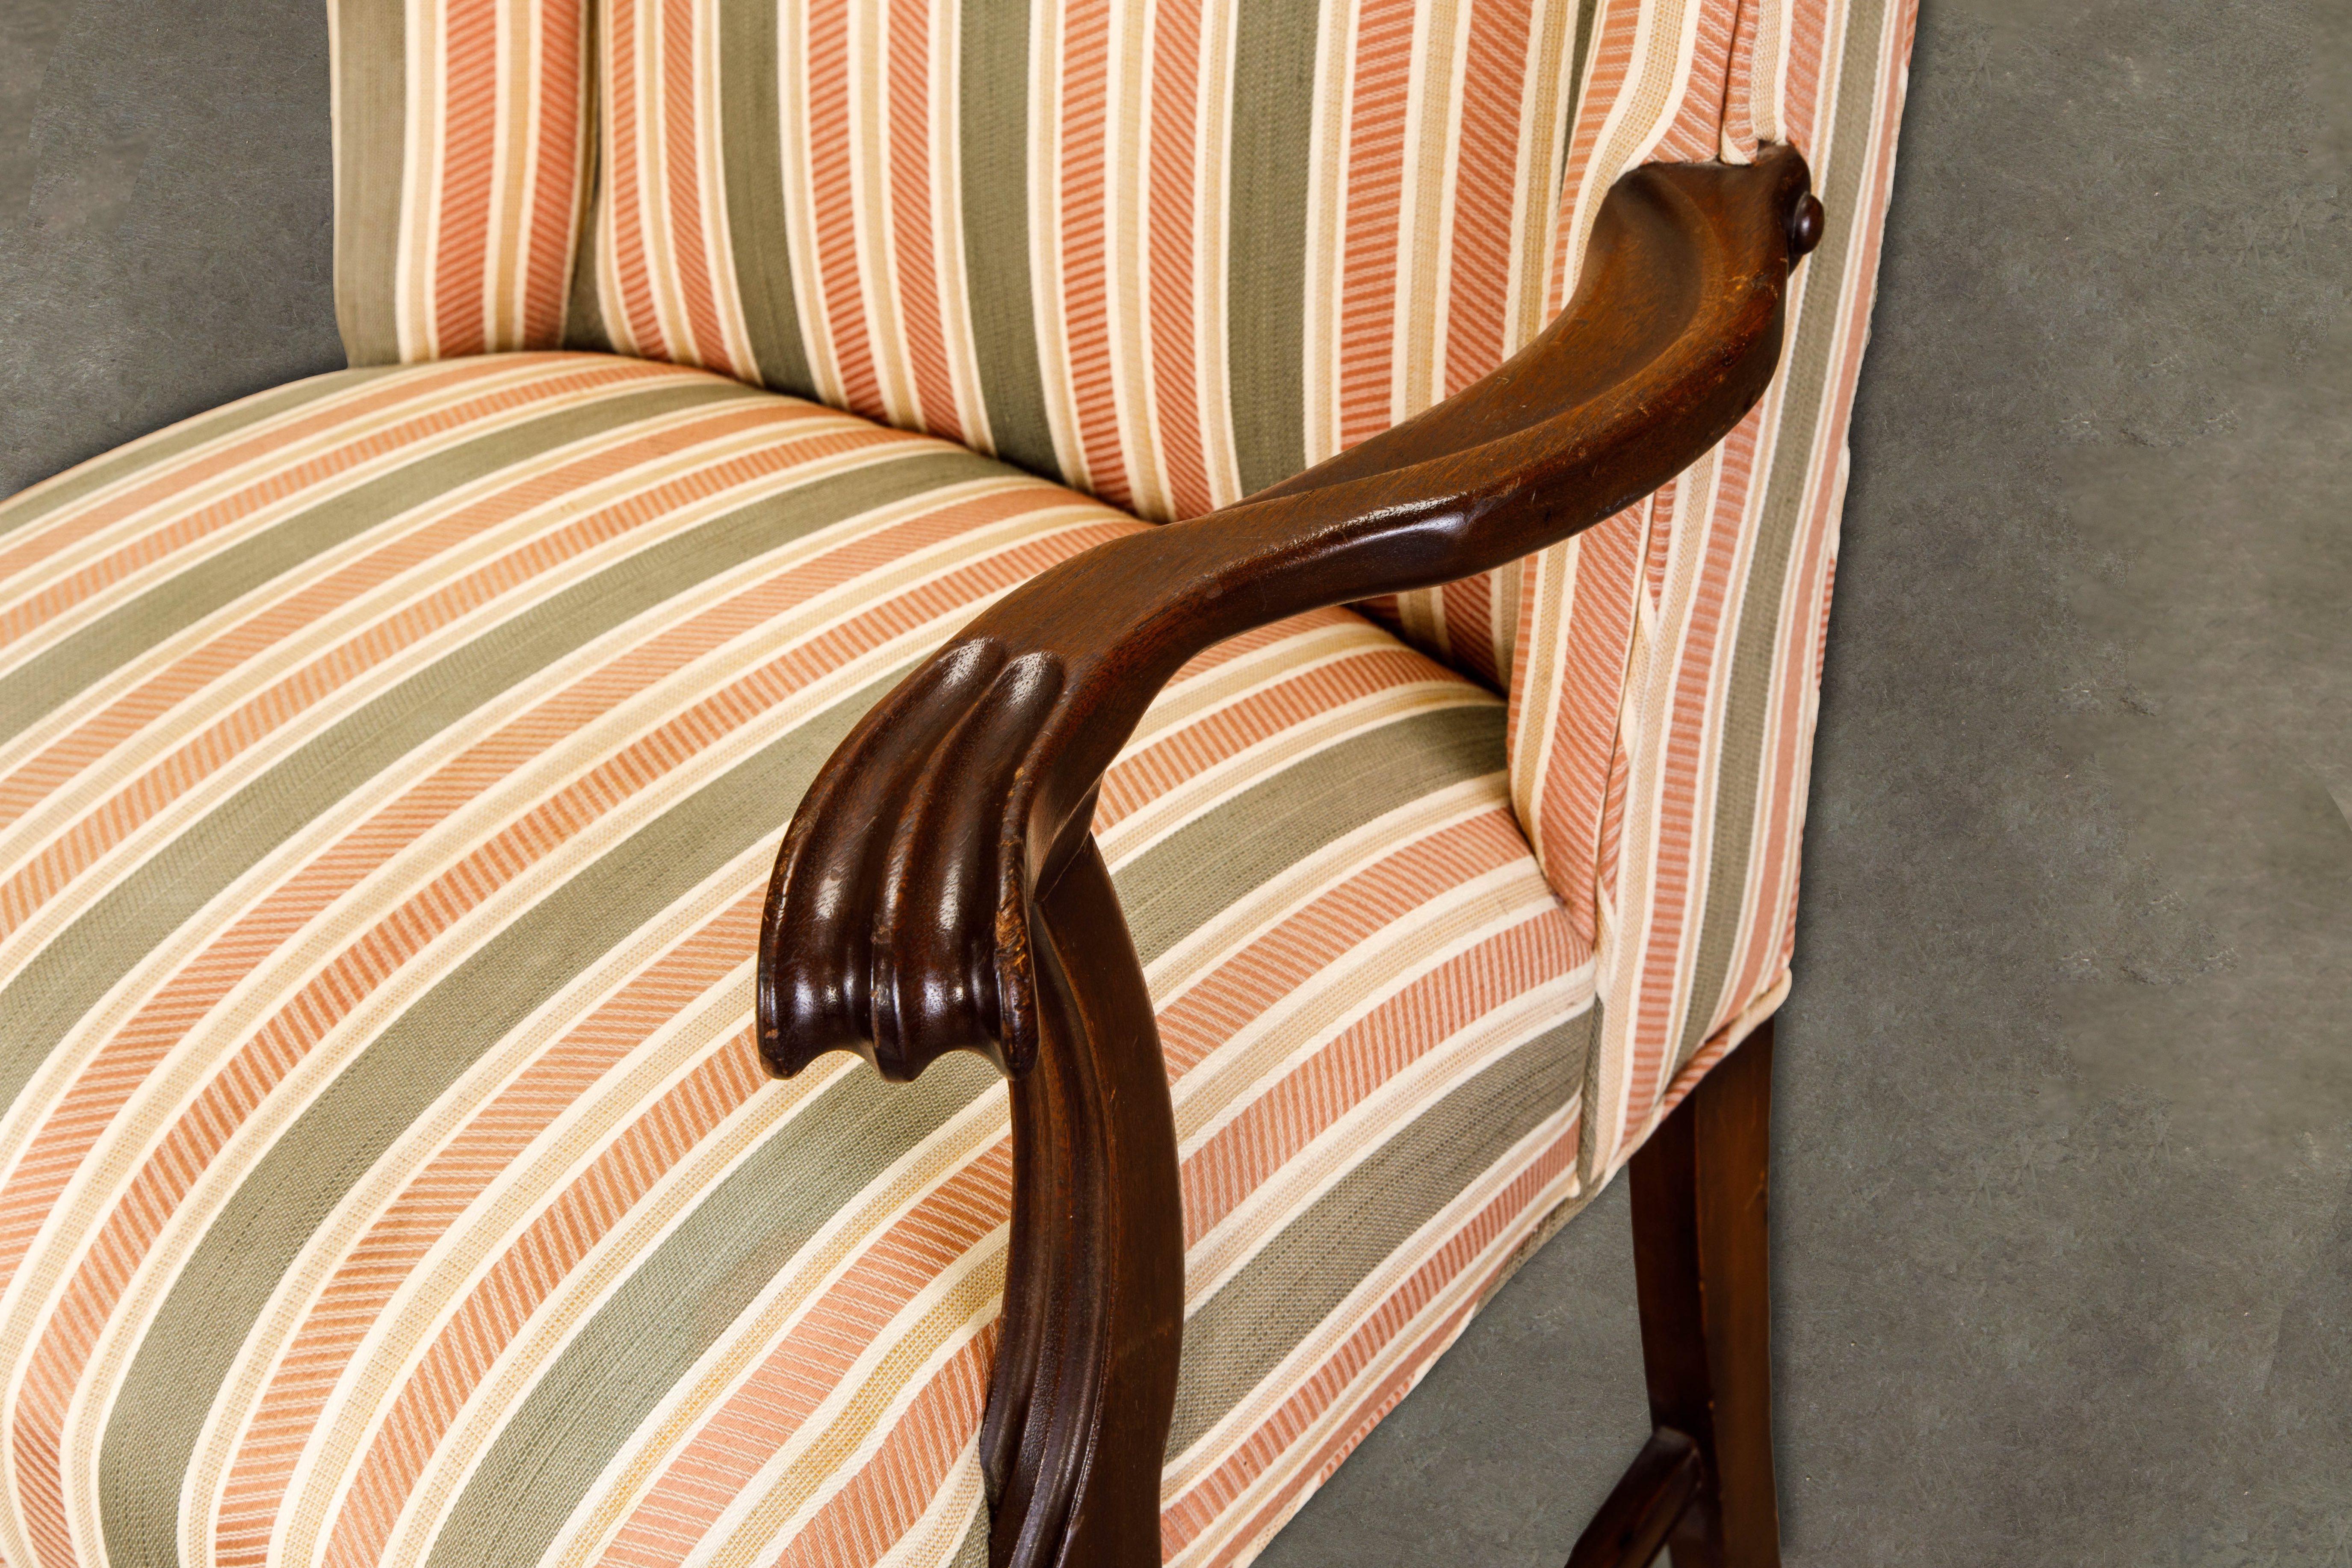 Gainsborough Wingback Armchair Upholstered in Striped Fabric 5